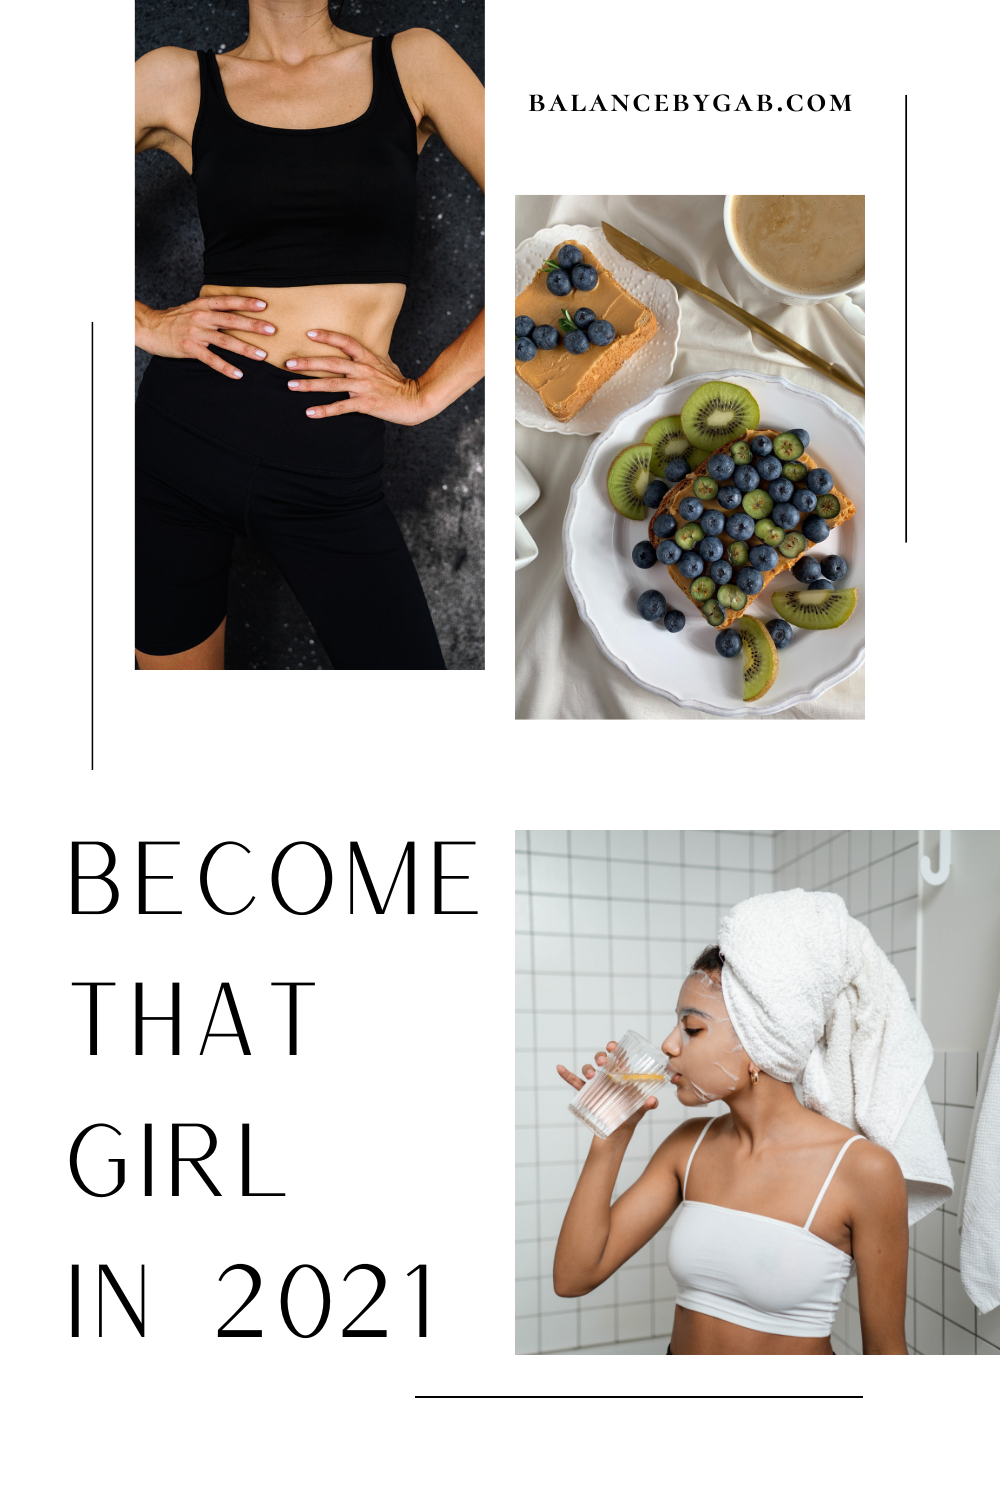 How To Become “That Girl” in 2021 — Balance by Gab